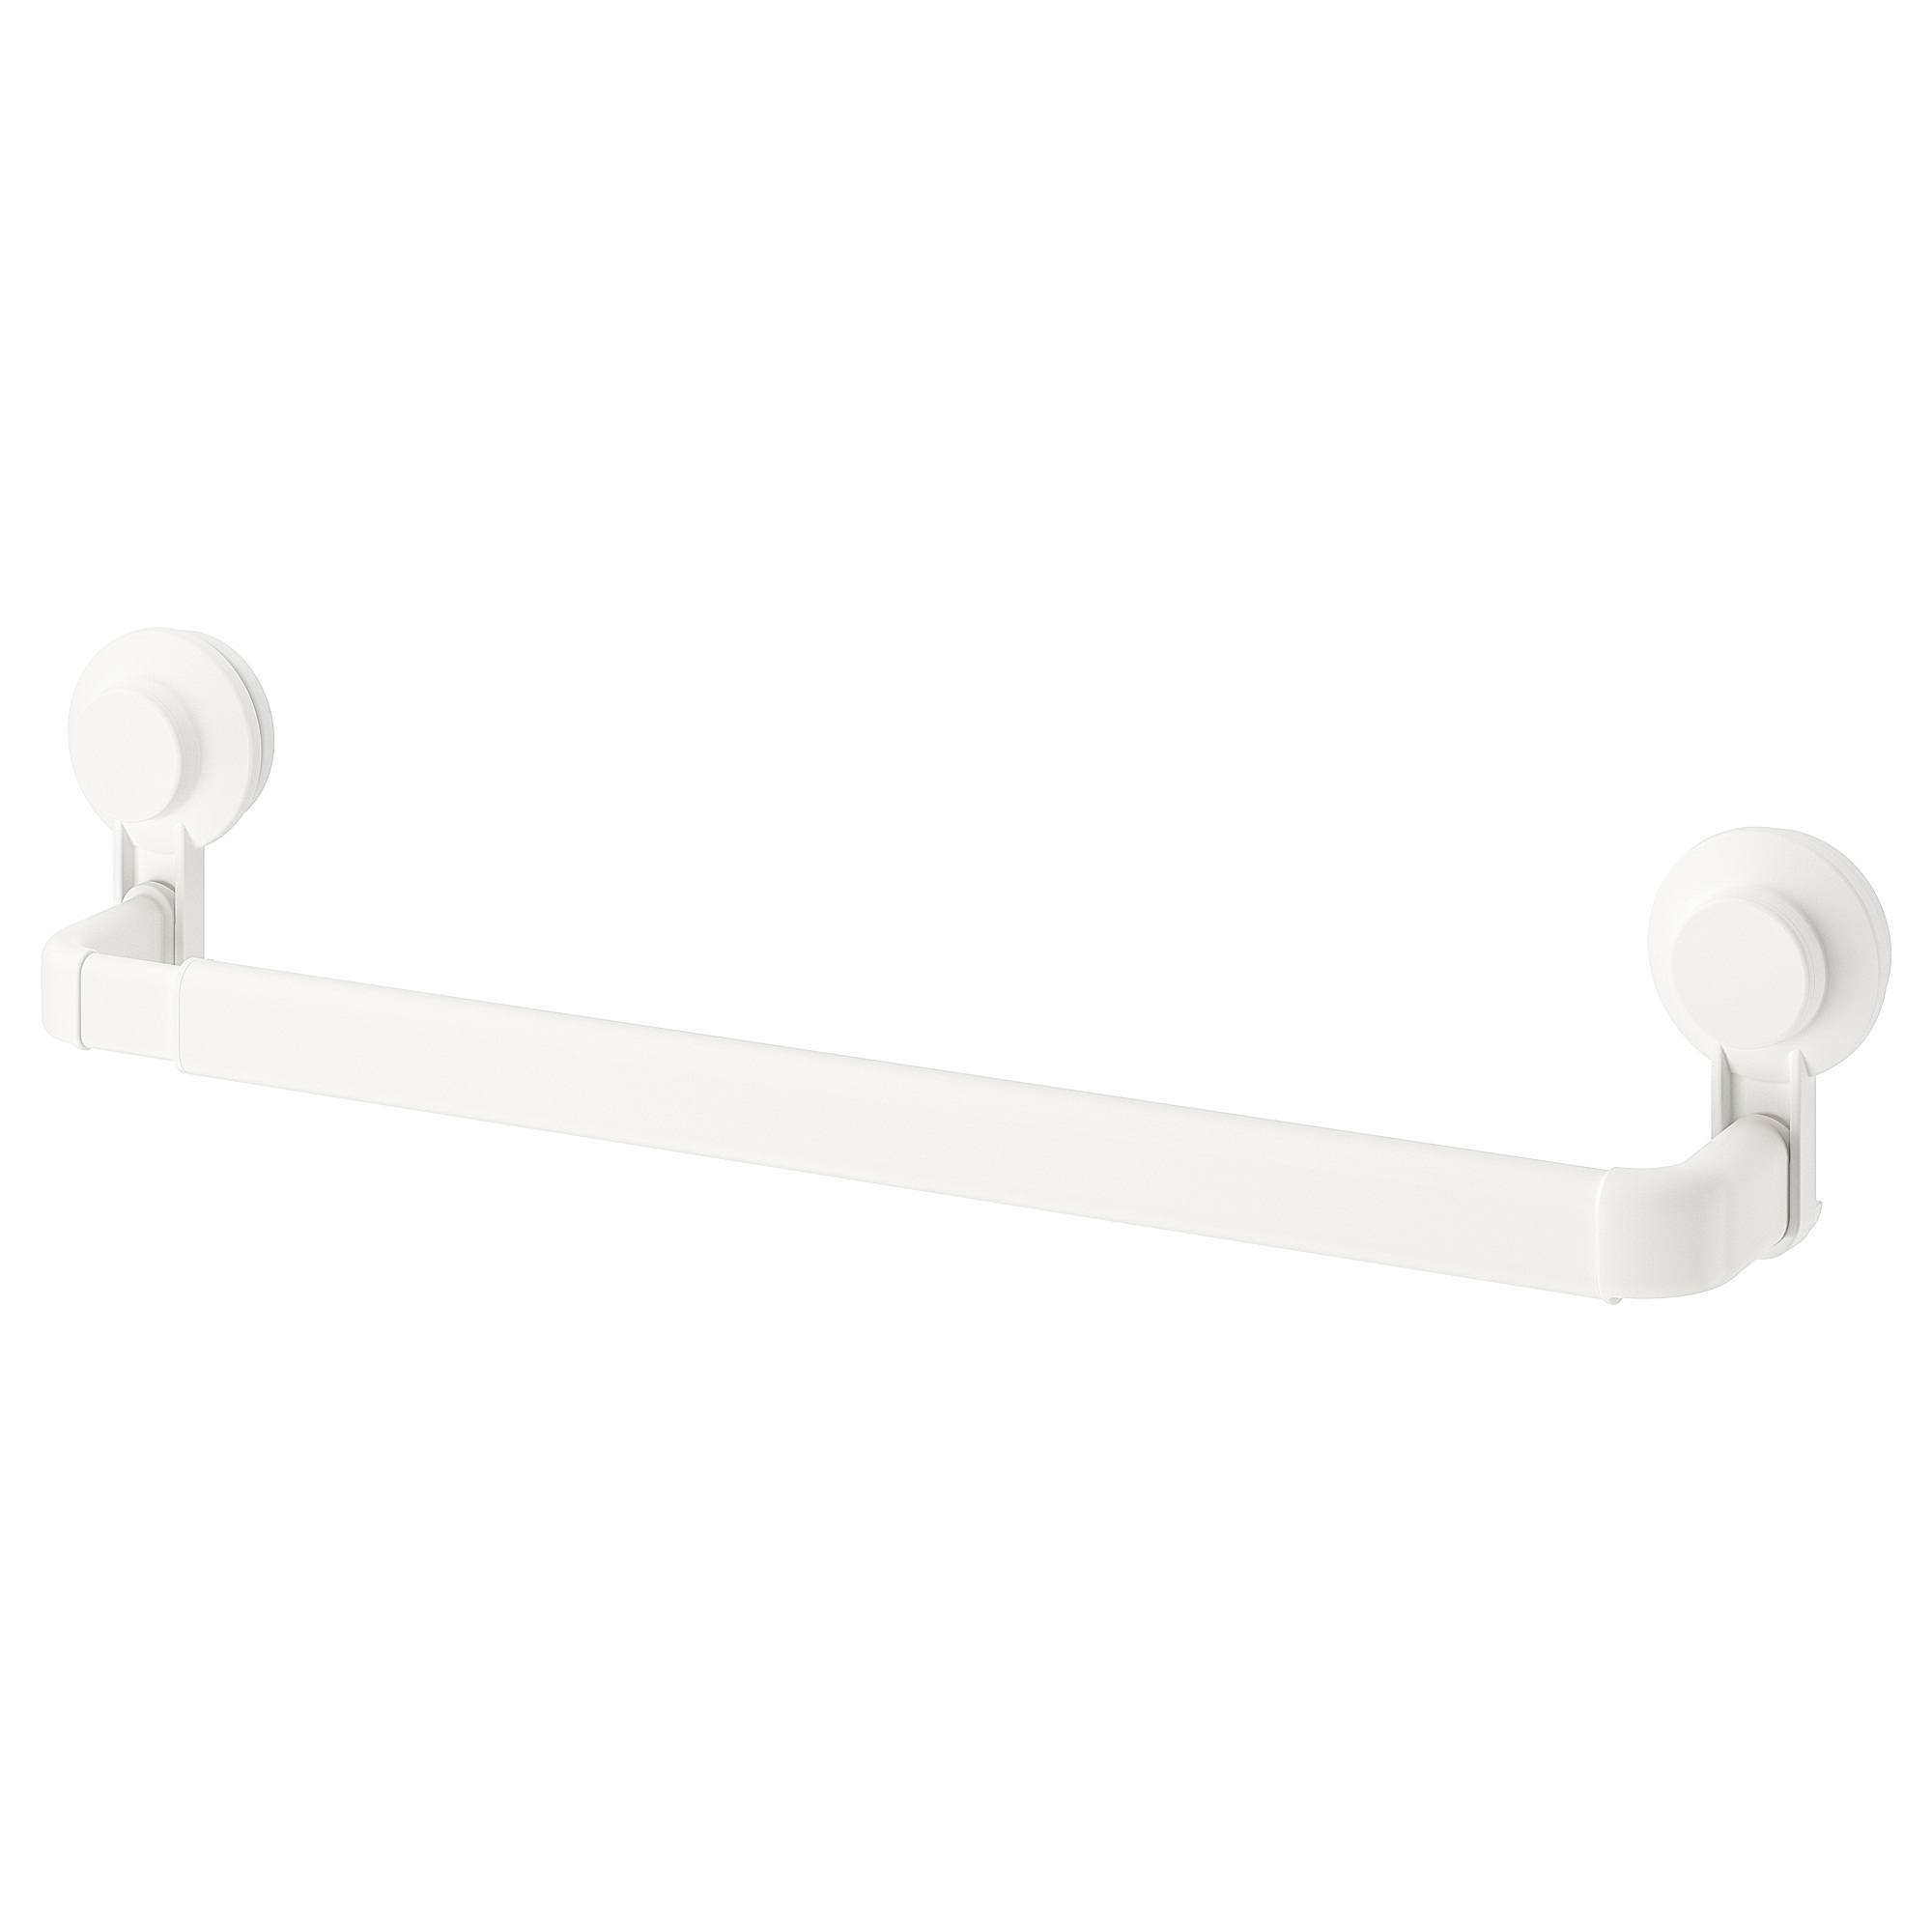 TISKEN towel rack with suction cup